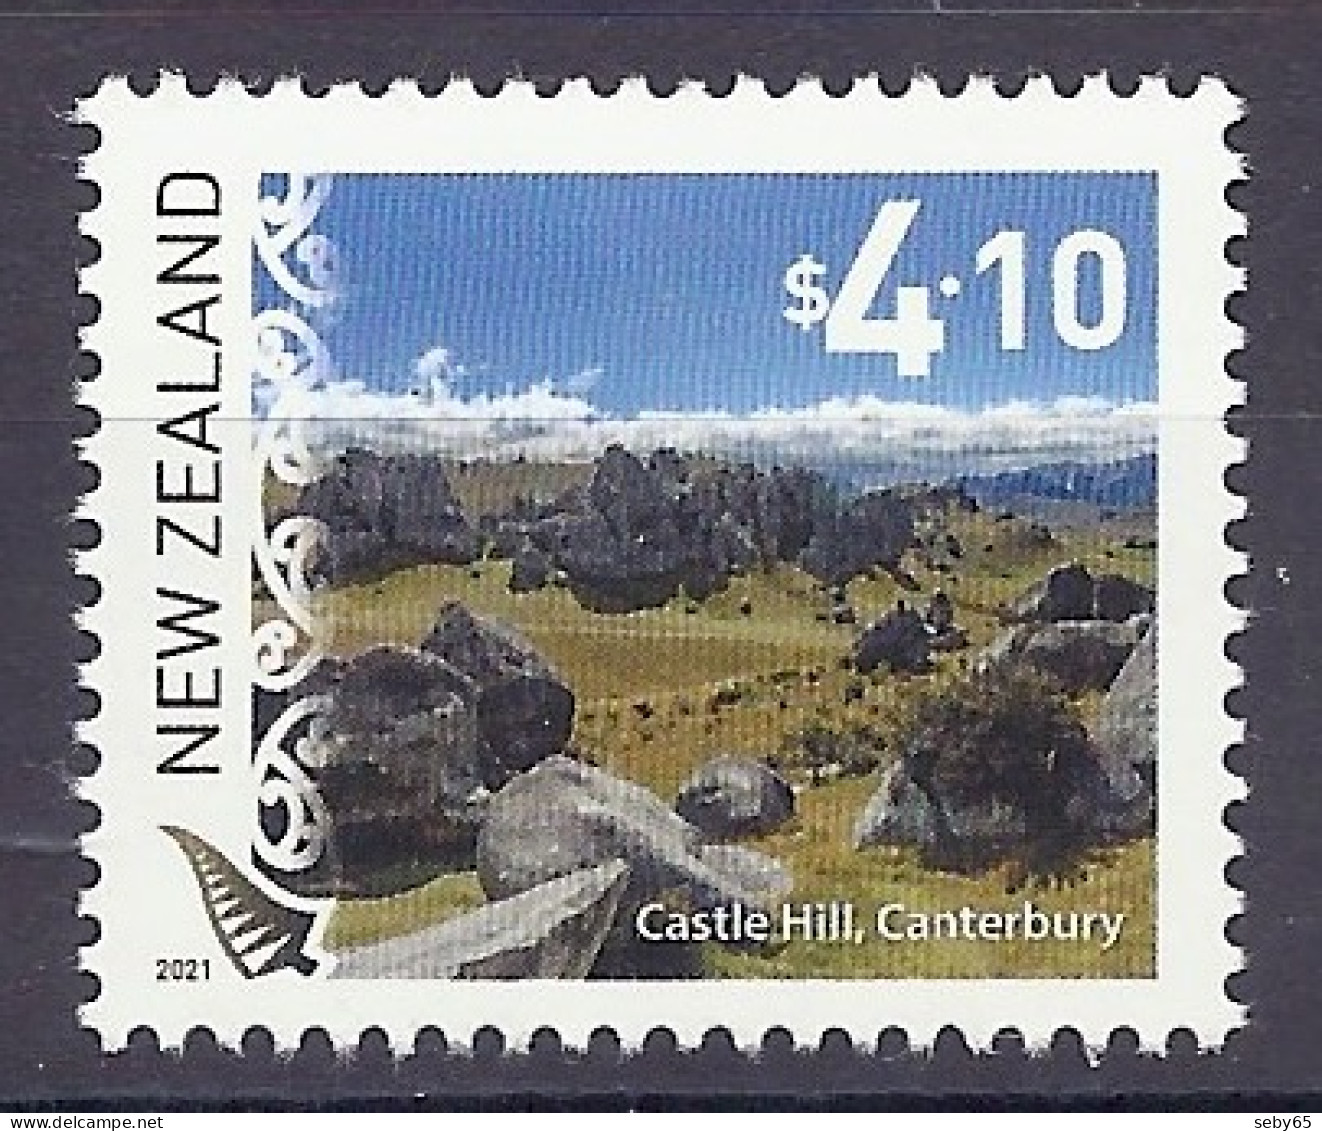 New Zealand 2021 - Definitives, Castle Hill, Canterbury, Scenic Views, Scenery, Mountains, Rocks, Landscapes - MNH - Ongebruikt